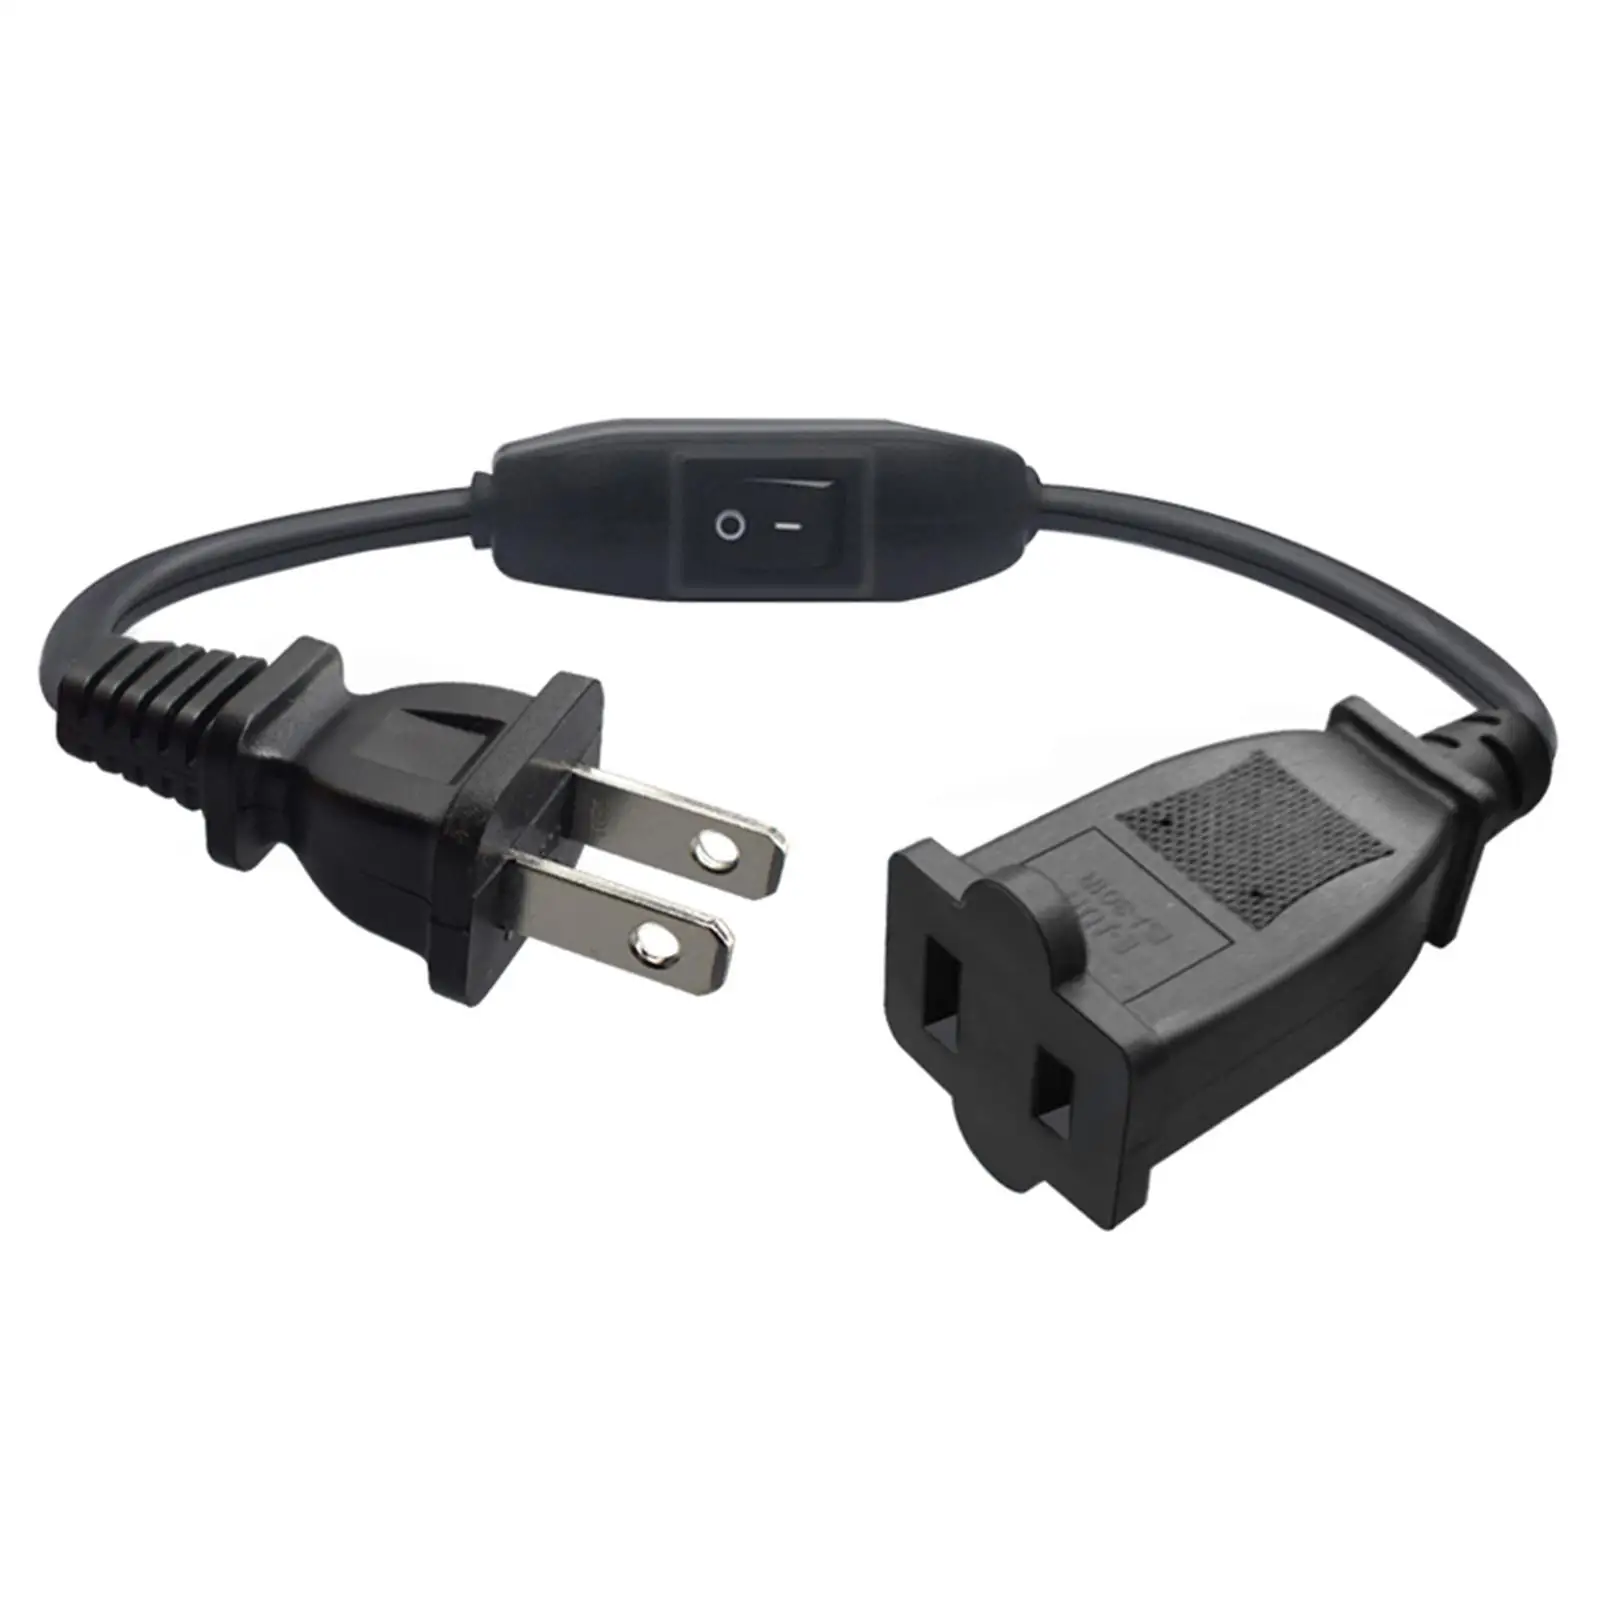 2 Prong Polarized Extension Cord with Switch for Lamps Power Adapters